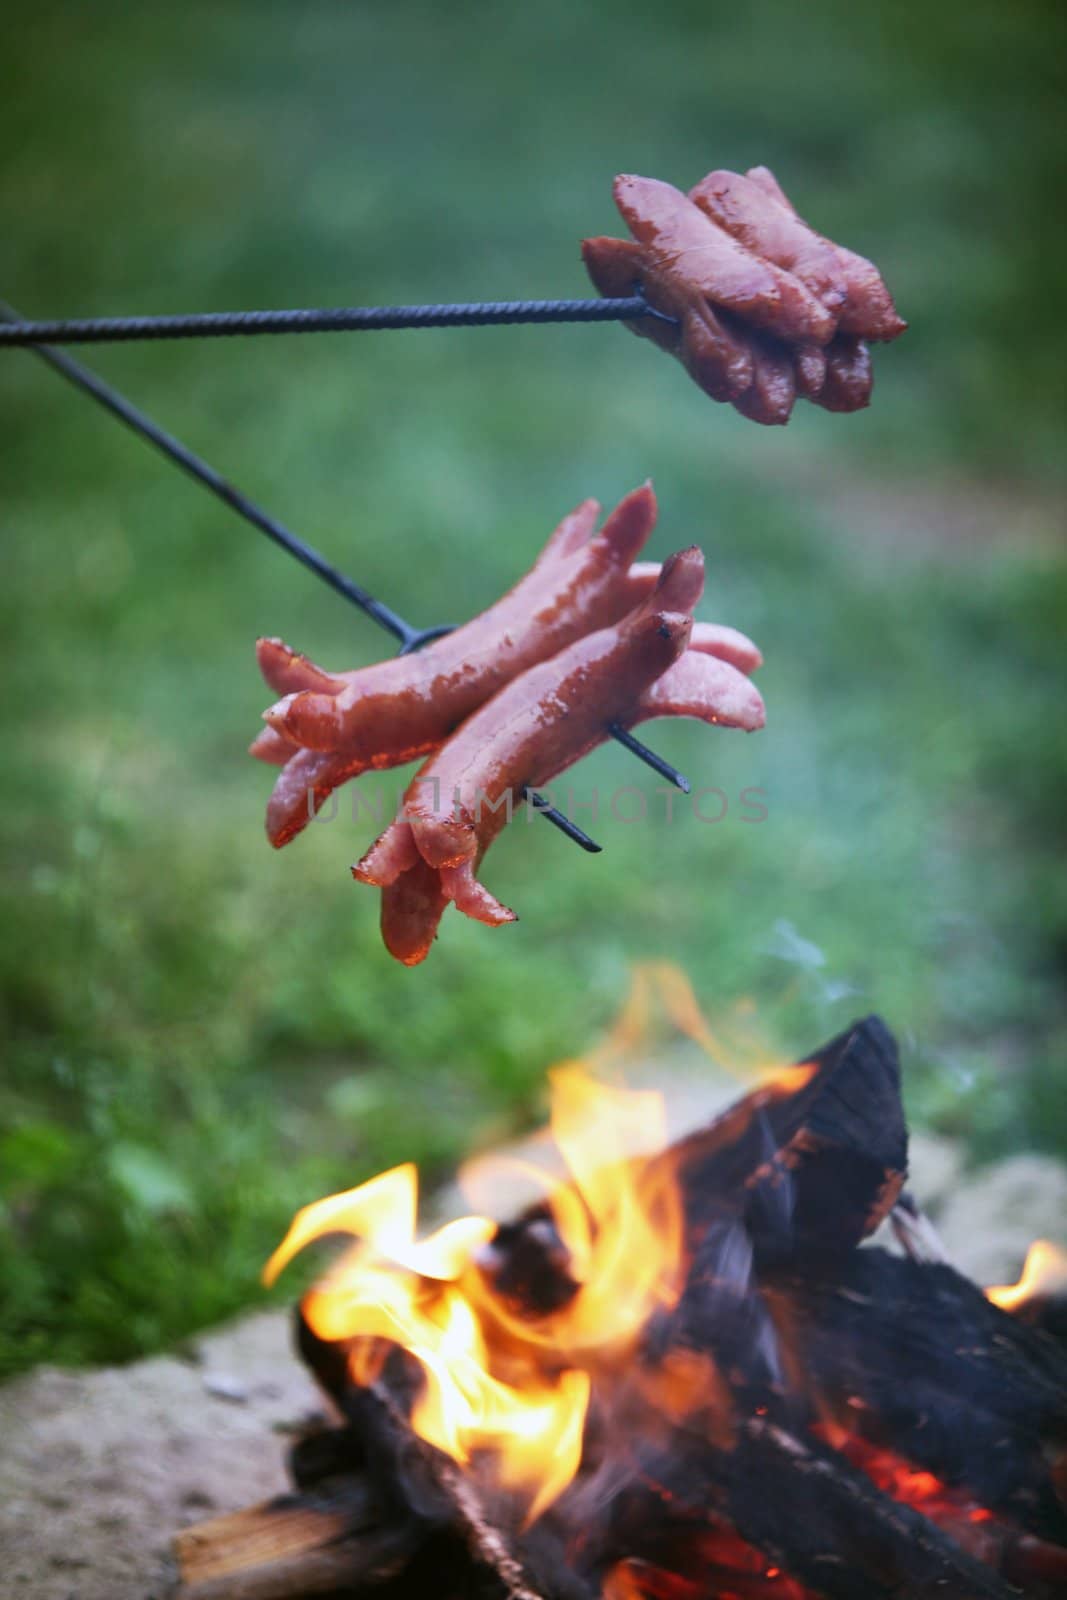 Roasting sausages on campfire in the garden by haak78